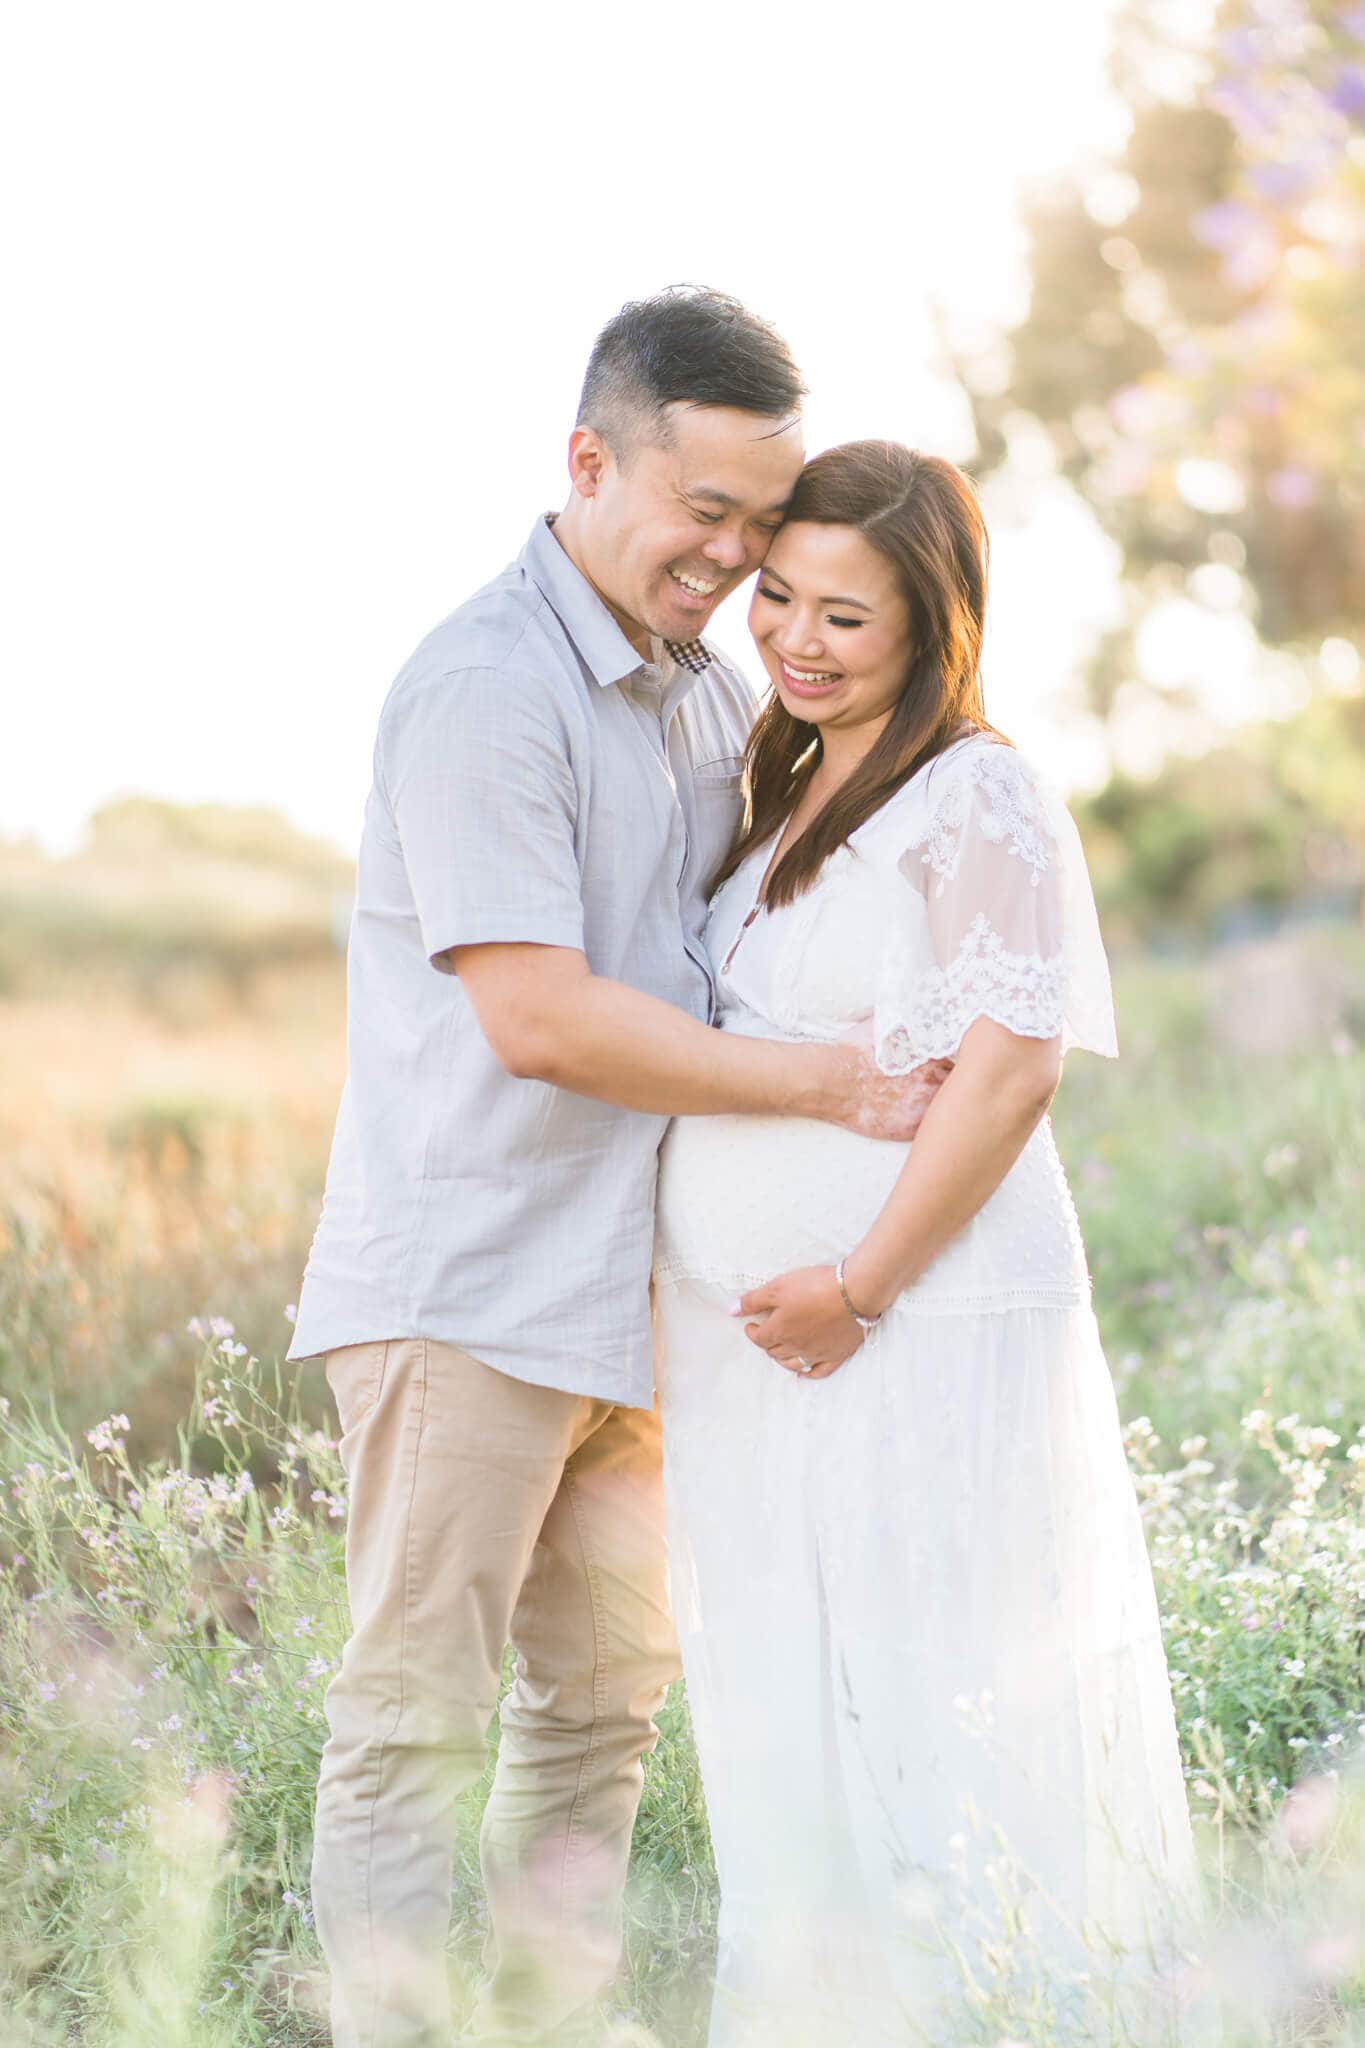 Pregnant mom and dad laughing and embracing each other on a grassy flower field. 